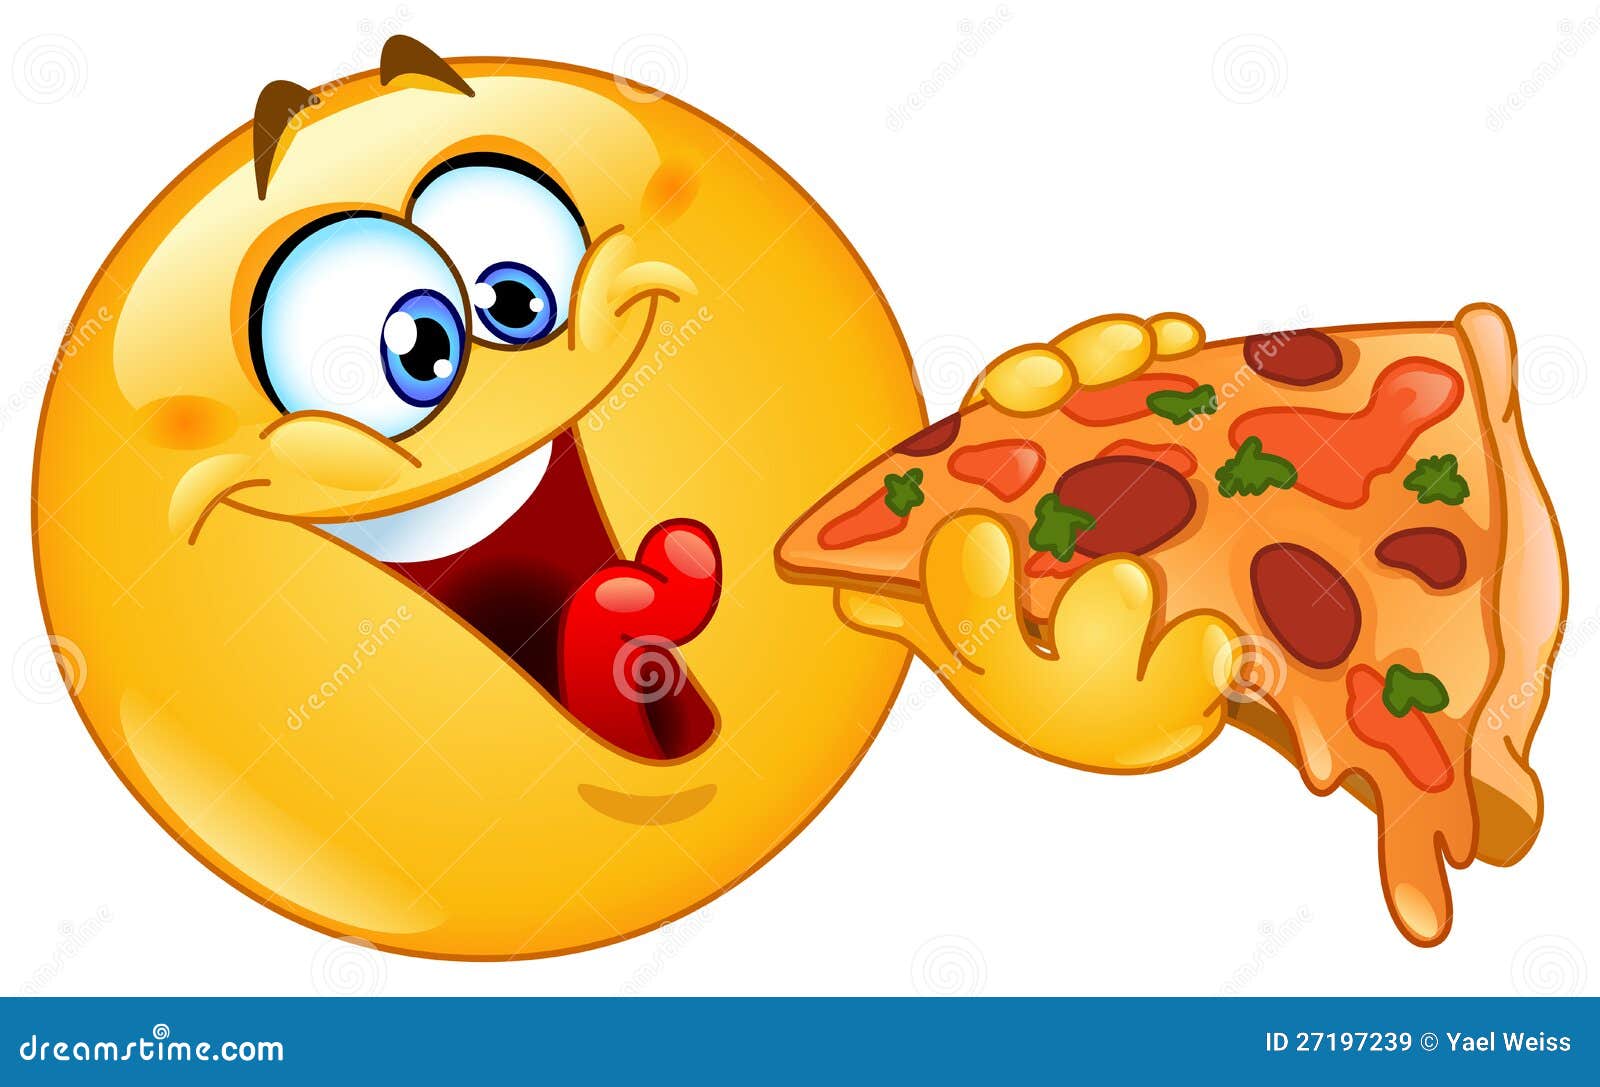 emoticon eating pizza